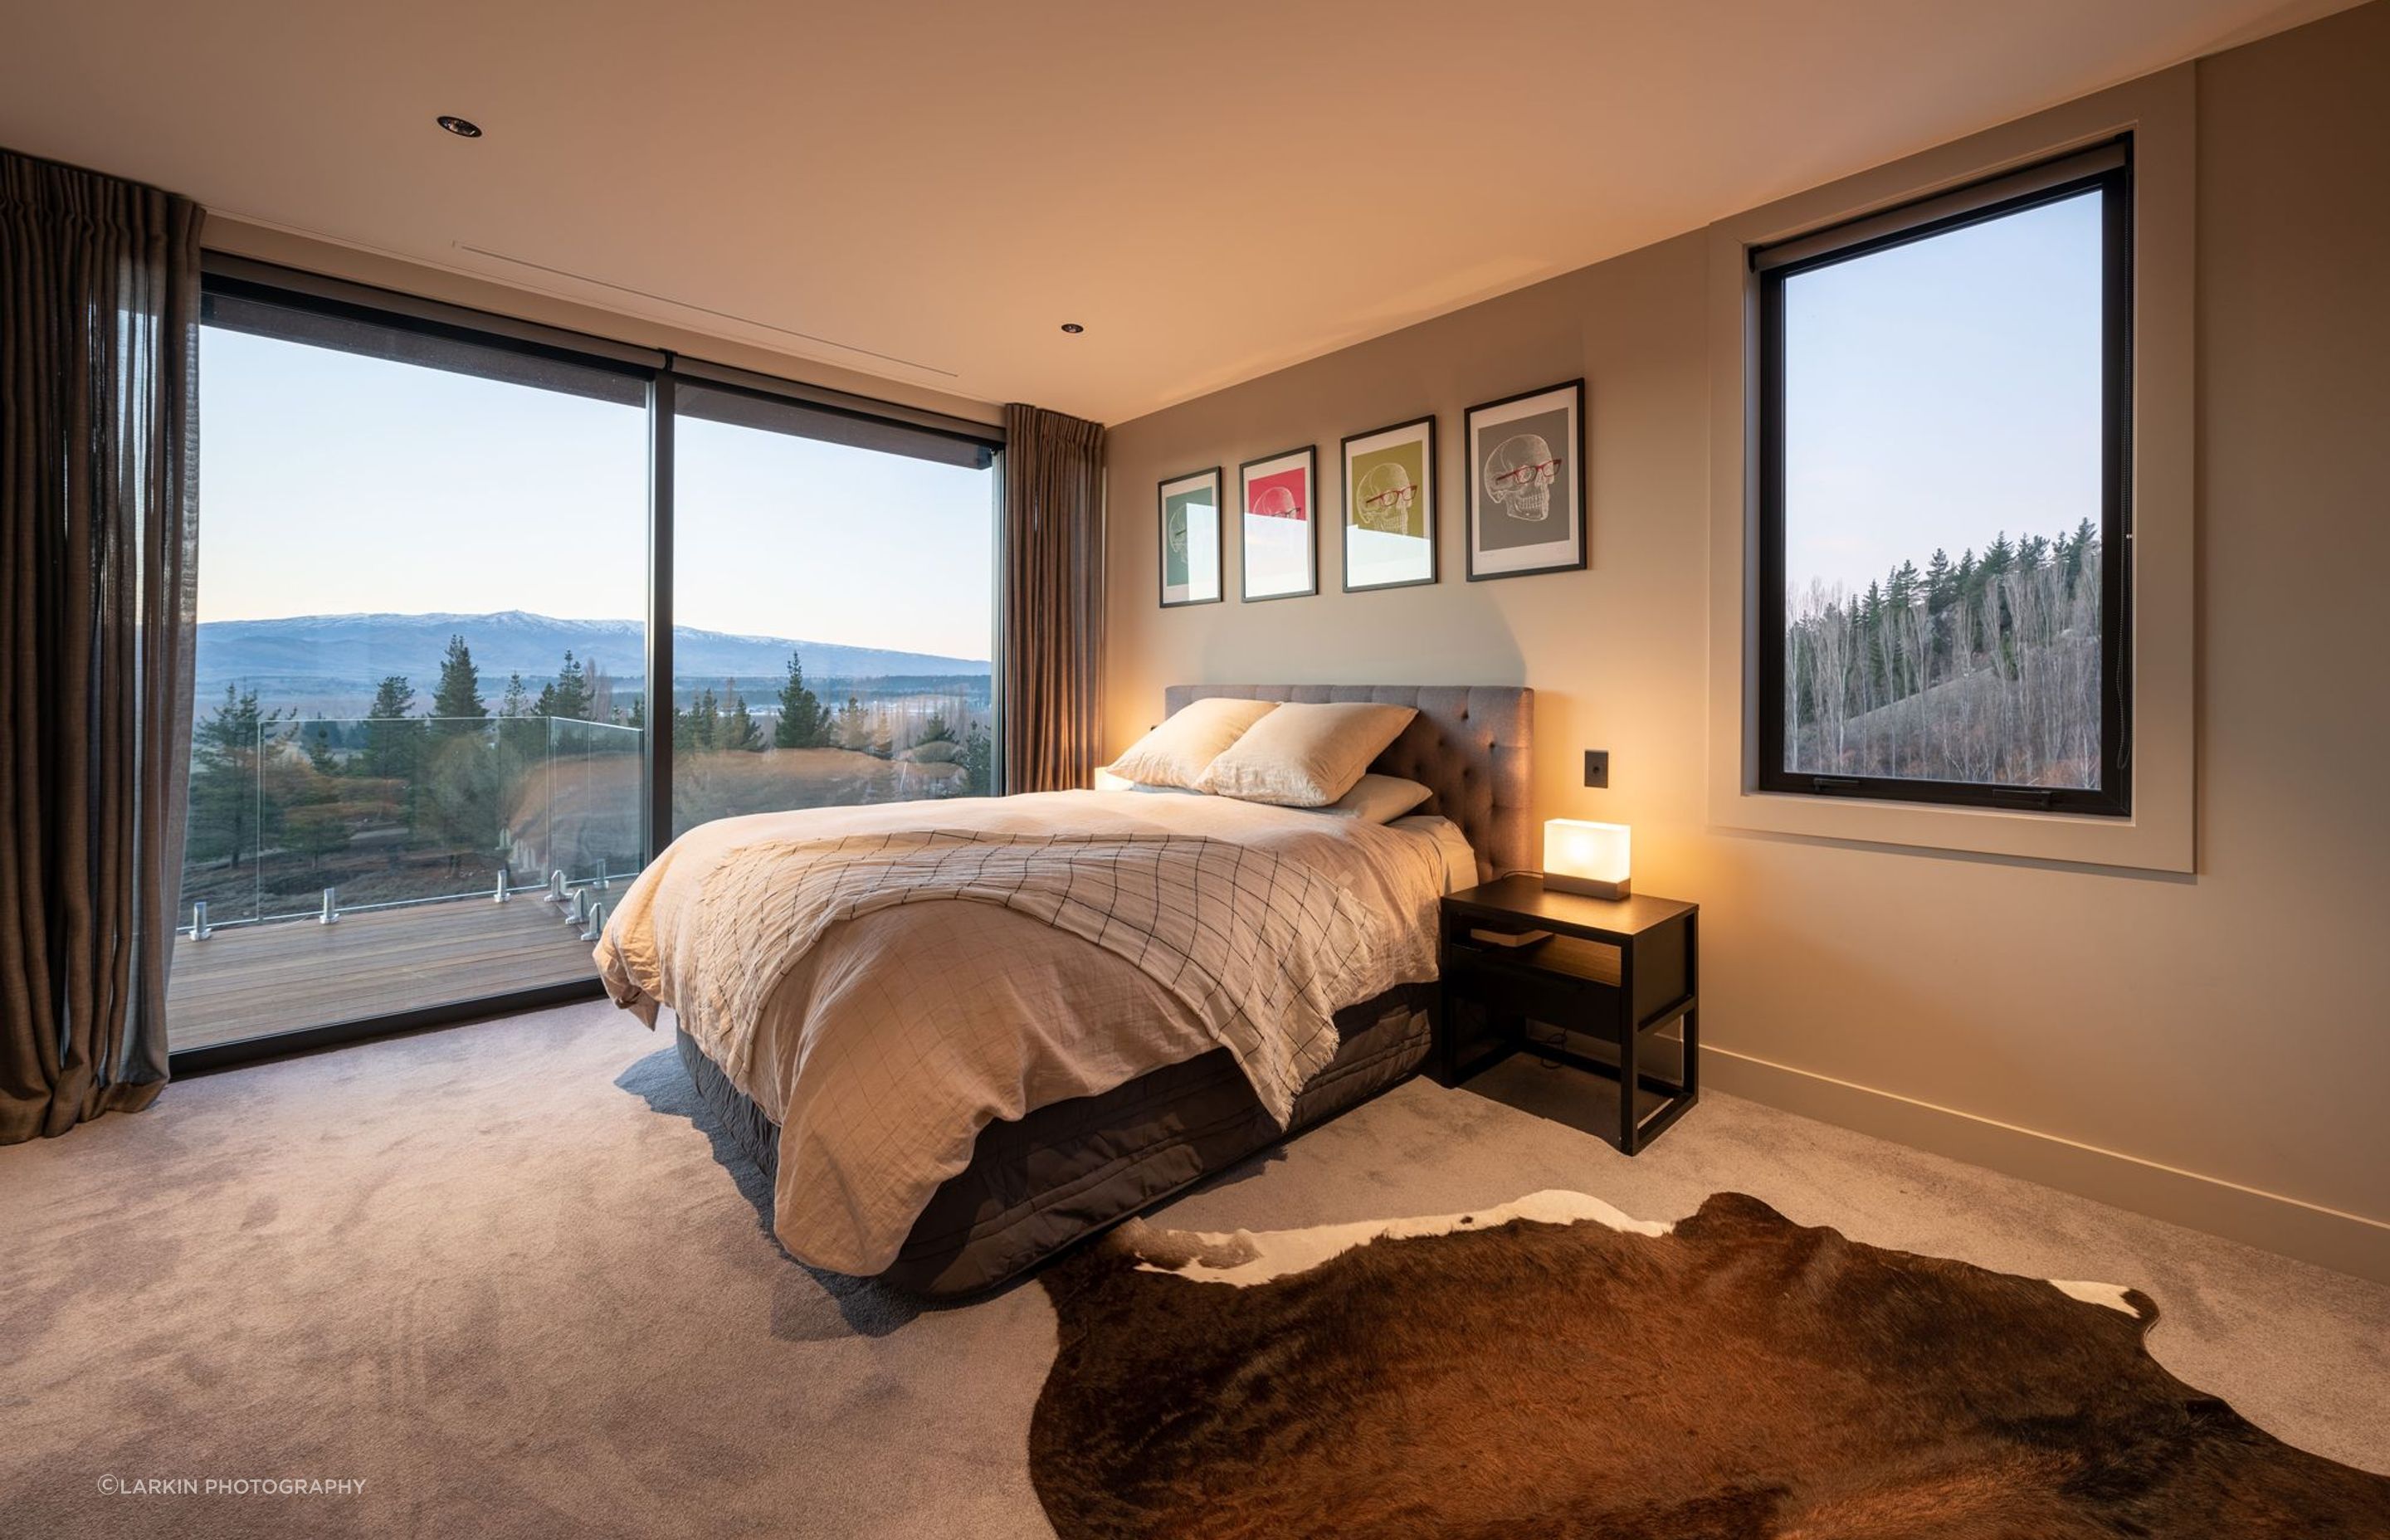 A large bedroom above the garage in the guest/family wing has a perfect picture window next to the bed that takes in a snapshot of the forest beyond.